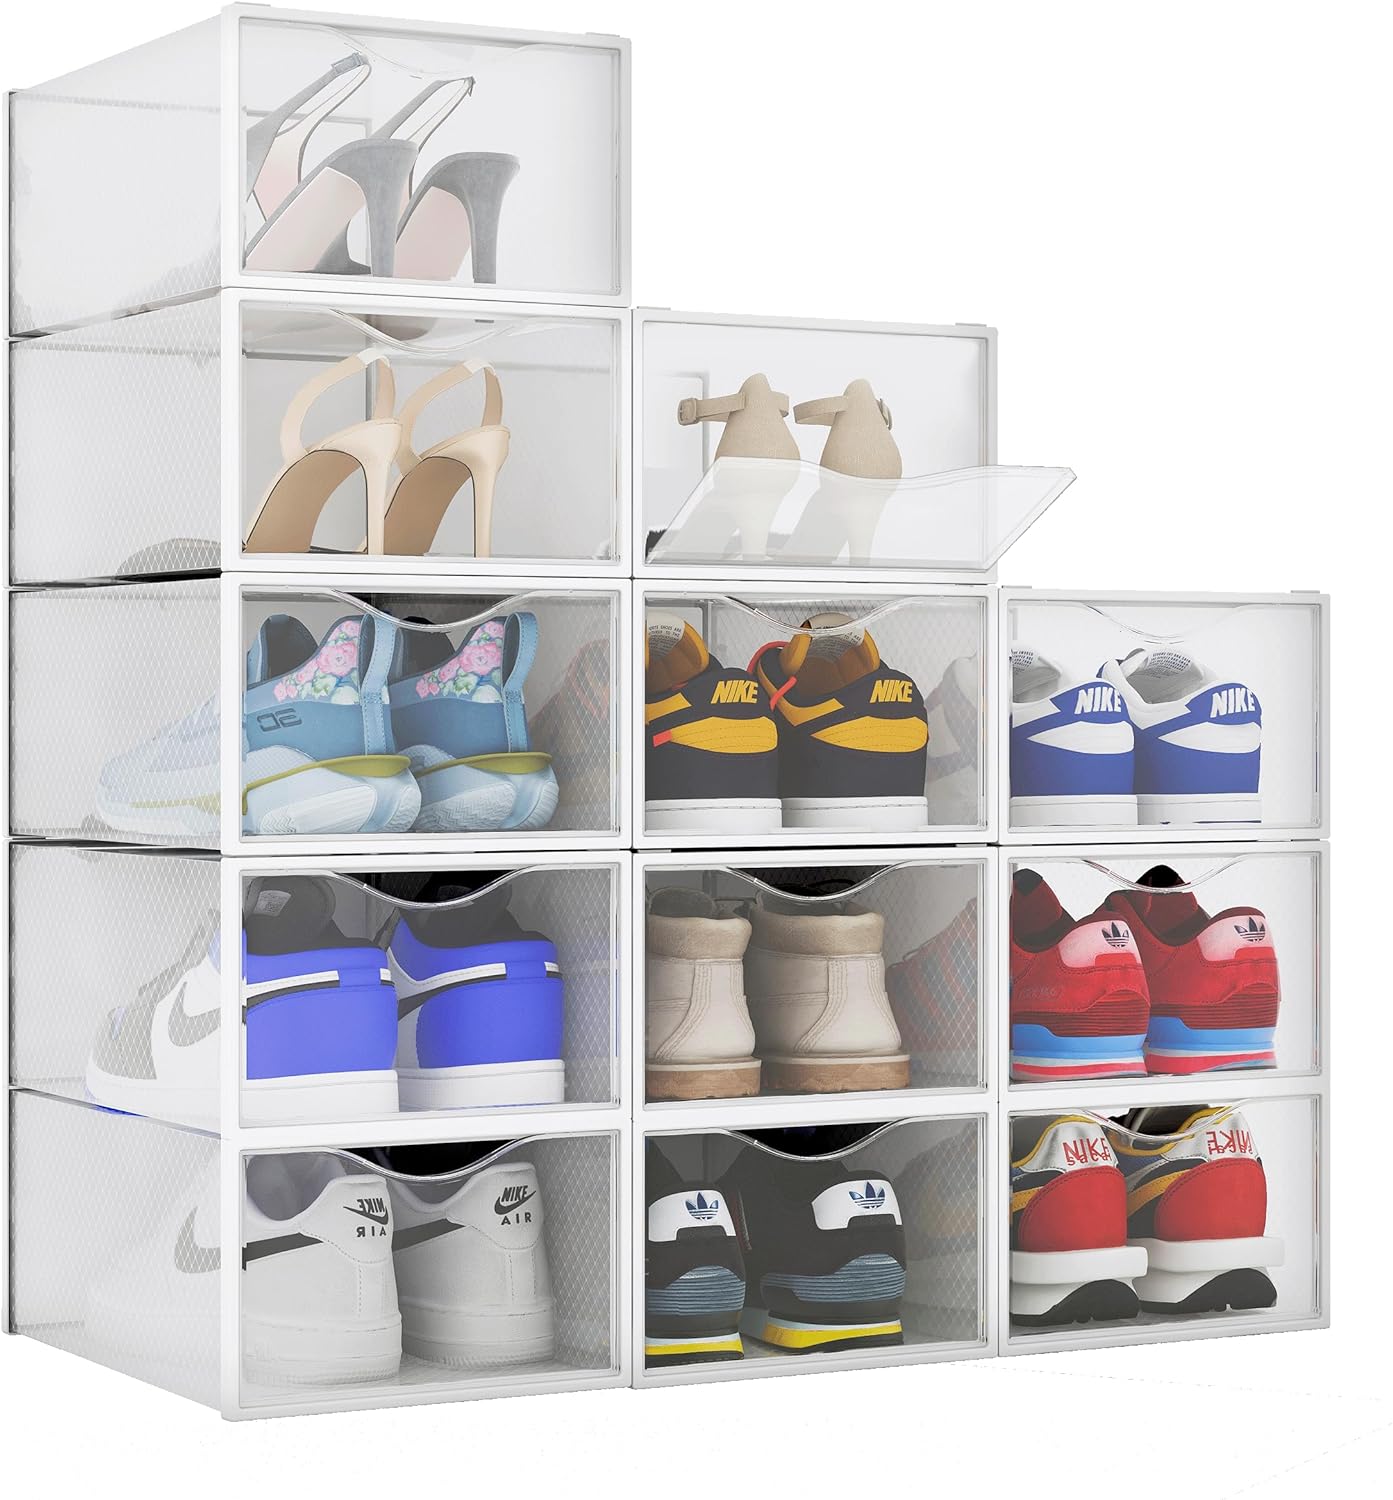 This shoe storage is perfect. So many cubes!